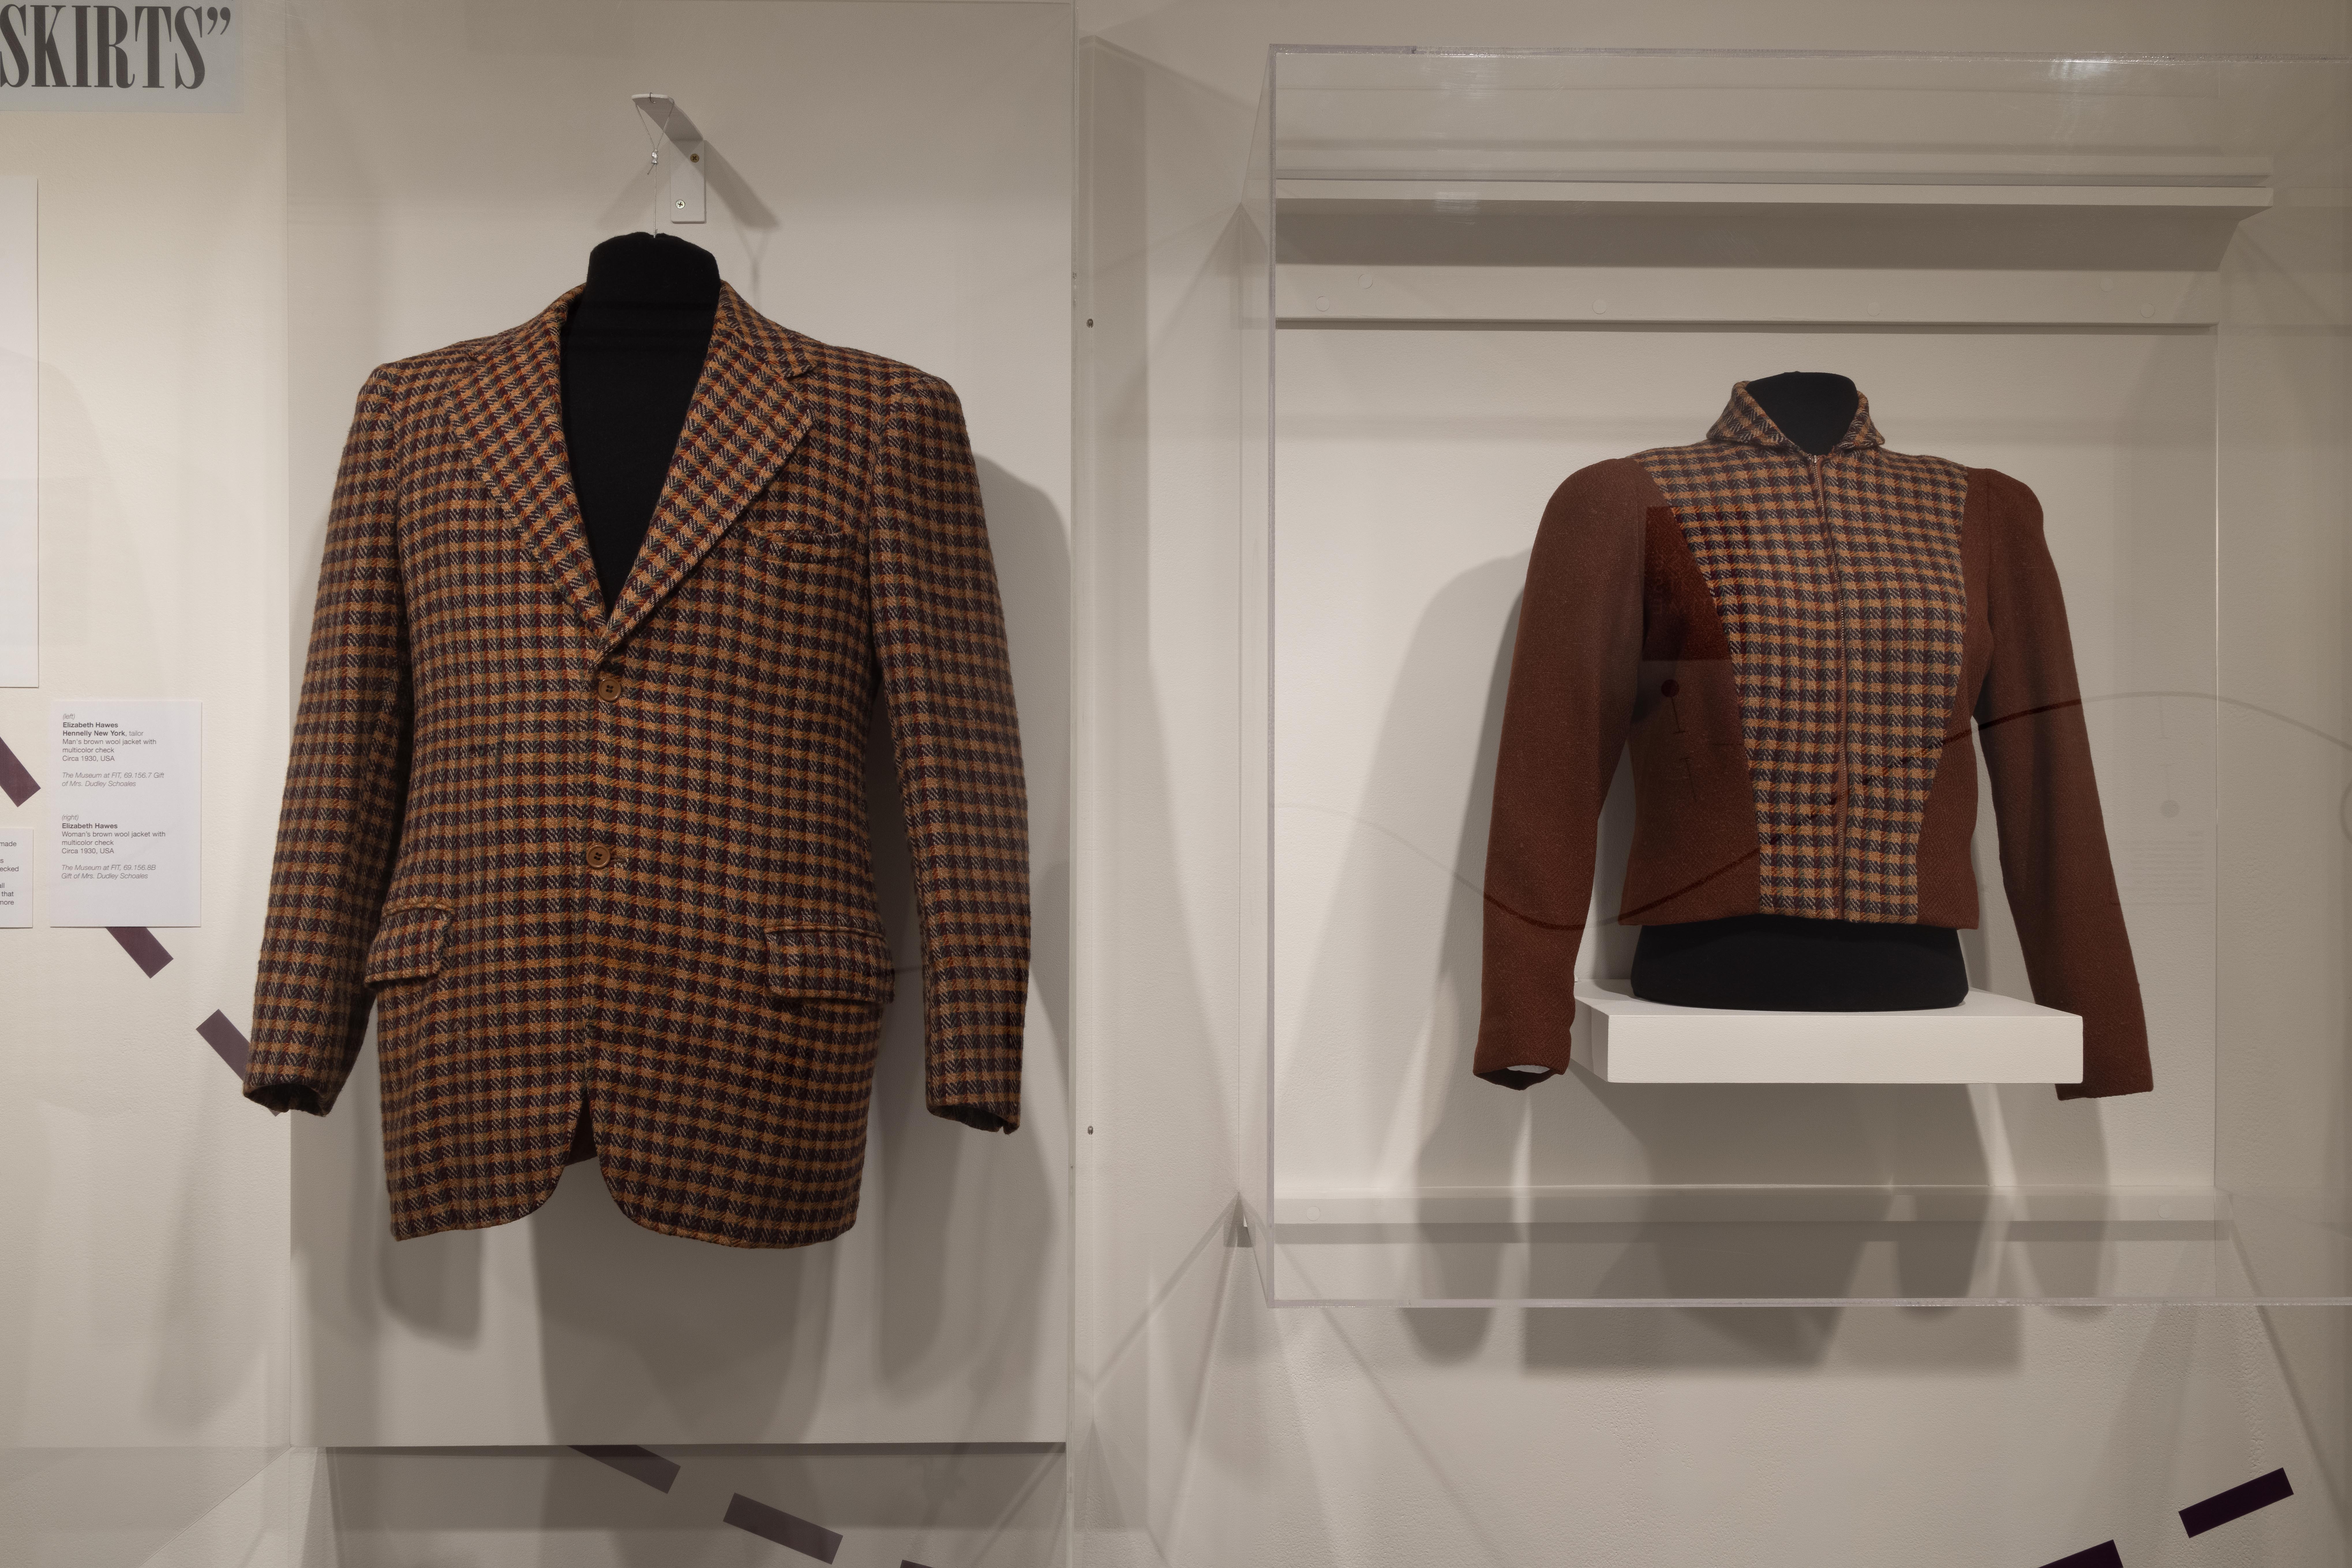 a man and women's jacket made of the same fabric side by side in a glass container